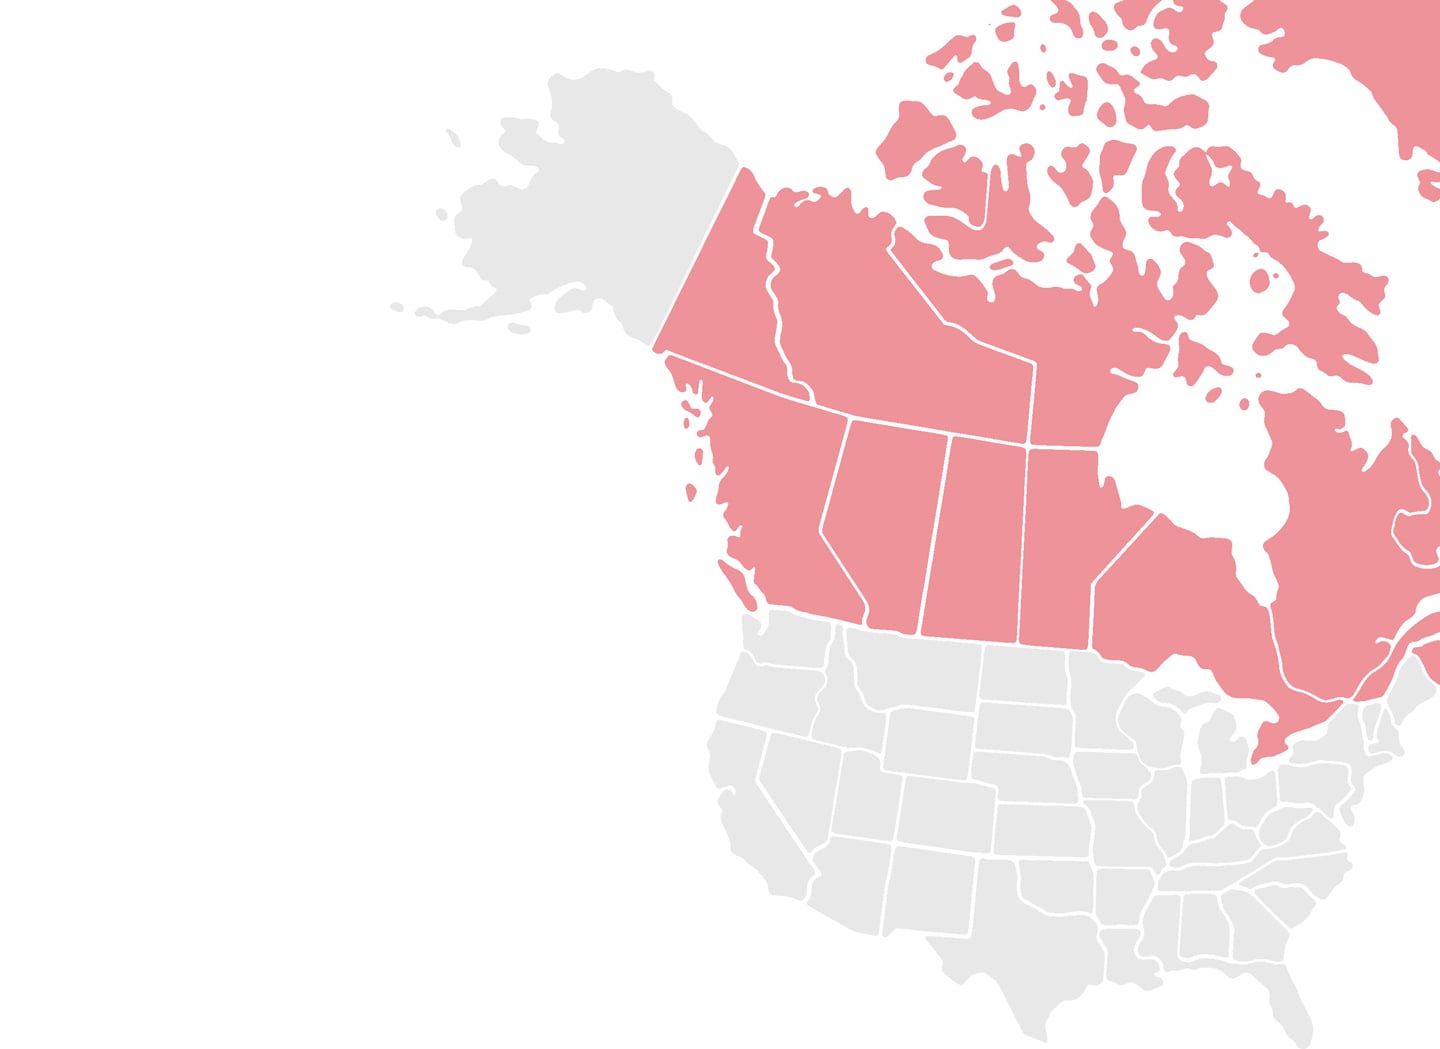 Canada highlighted in red